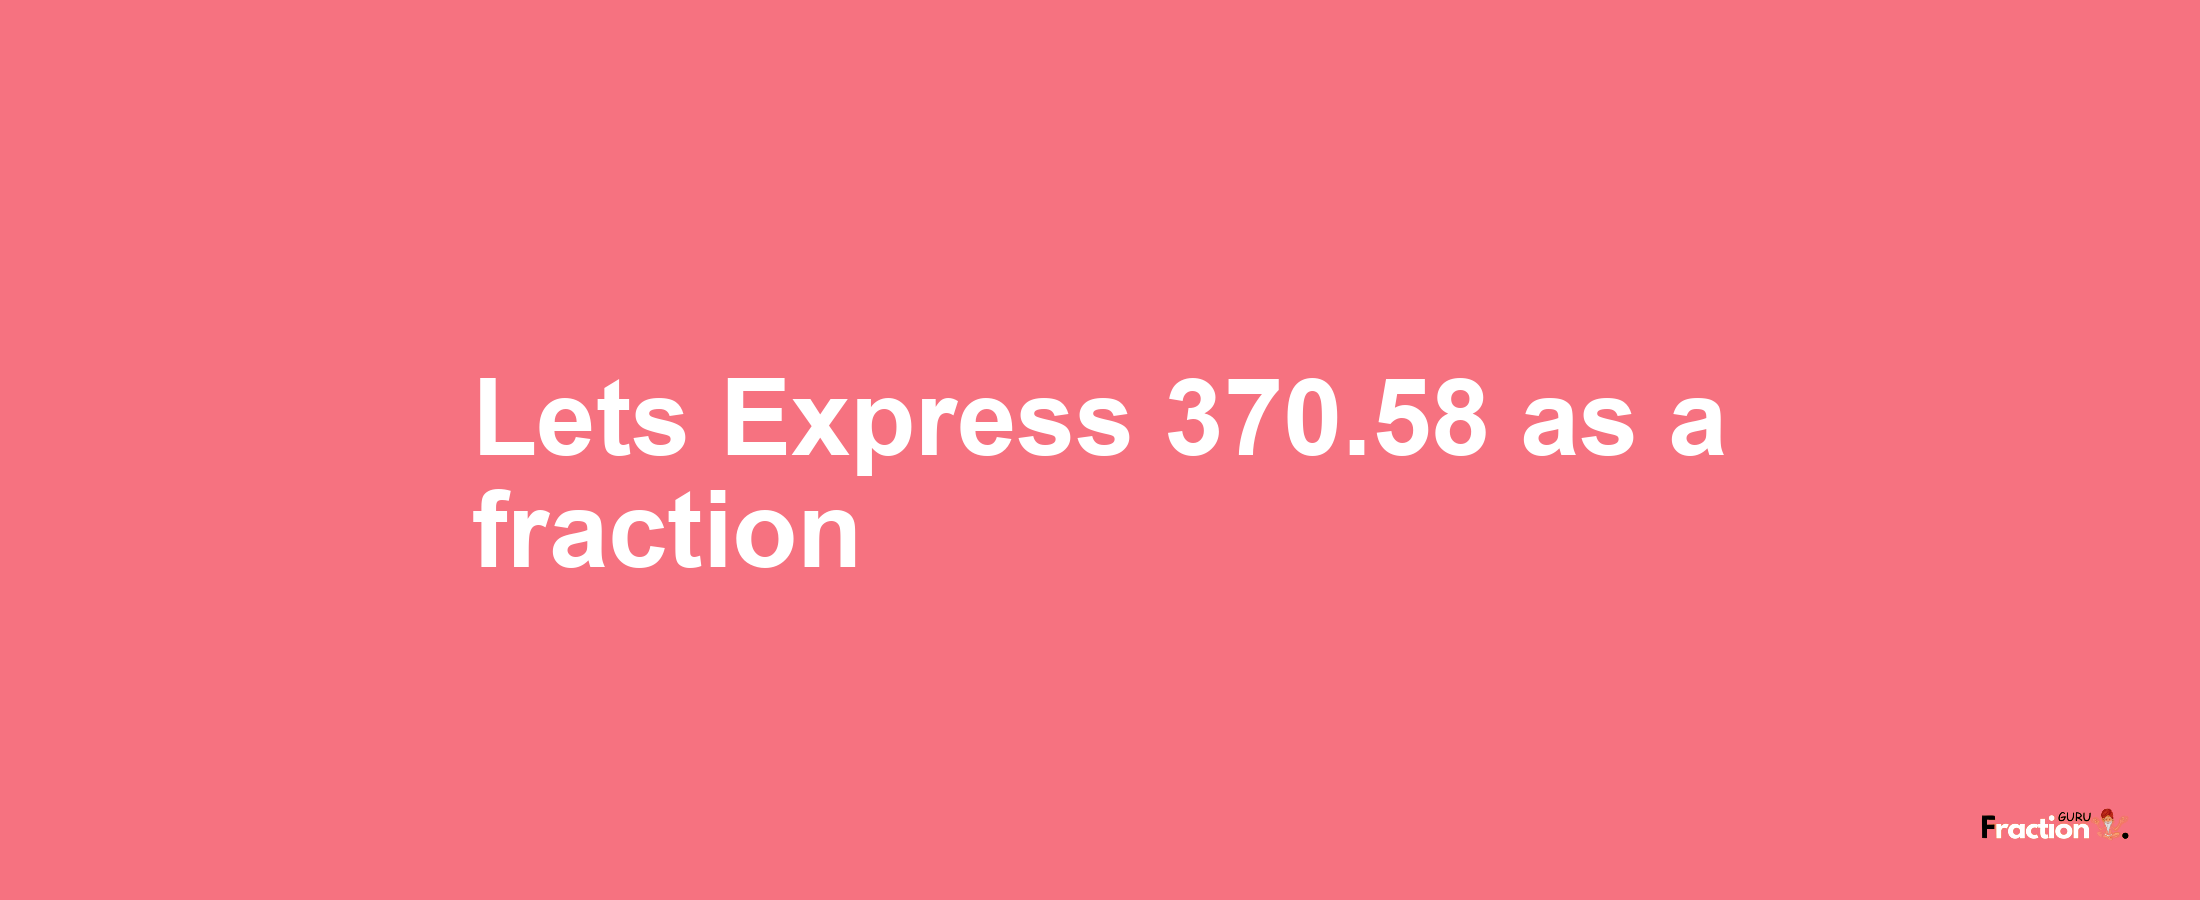 Lets Express 370.58 as afraction